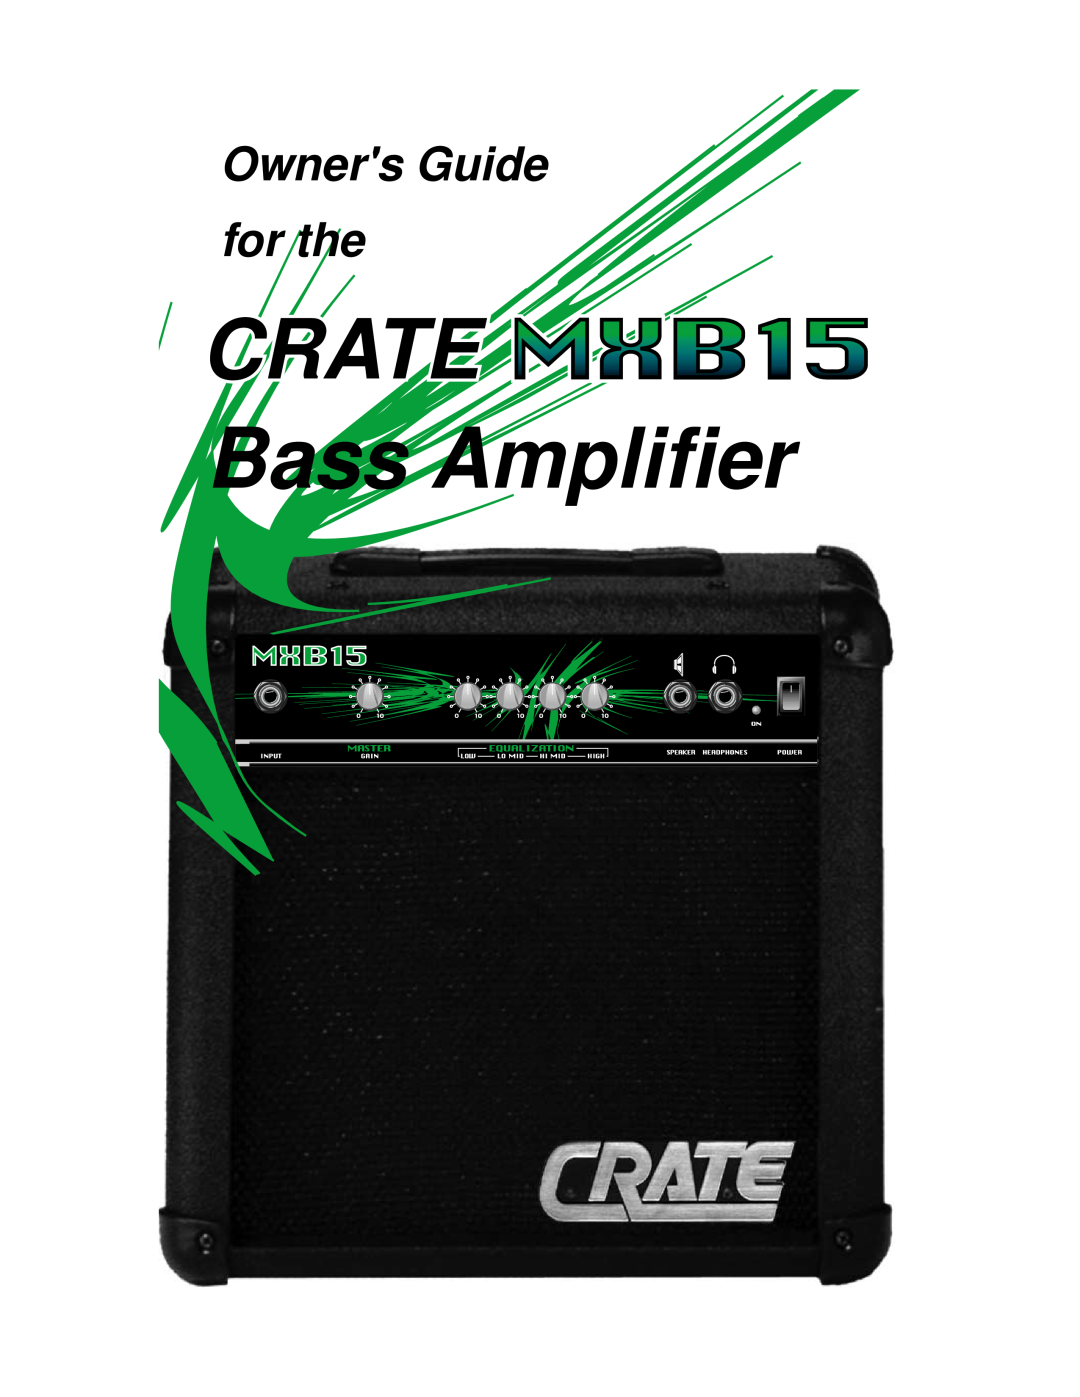 Crate Amplifiers MXB15 manual CRATE Bass Amplifier, Owners Guide for the 